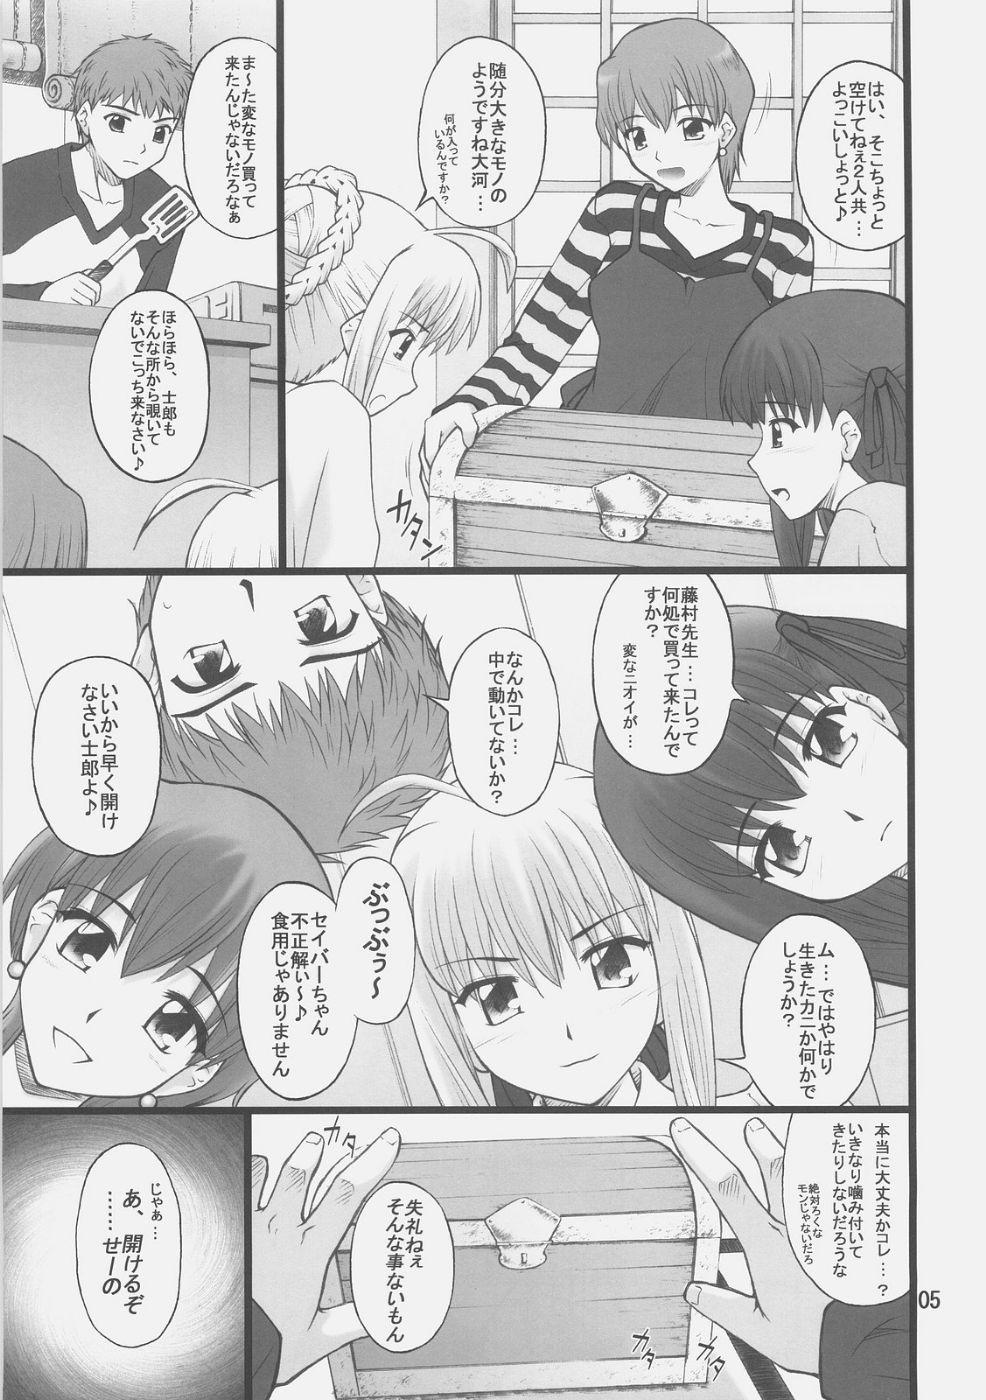 All Natural Grem-Rin 1 - Fate stay night Loira - Page 4